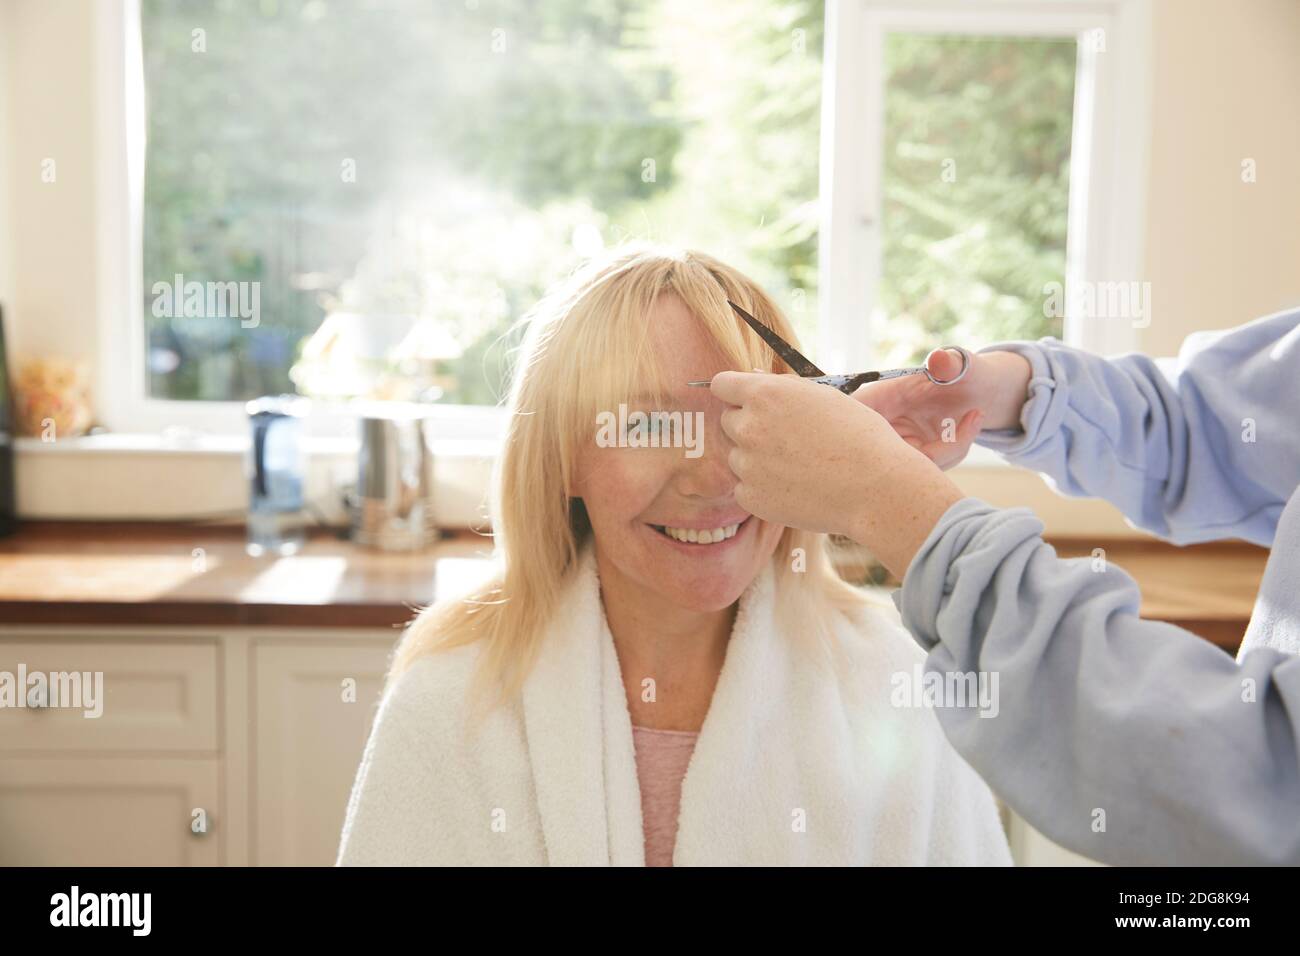 Daughter cutting bangs for happy mother in sunny kitchen Stock Photo